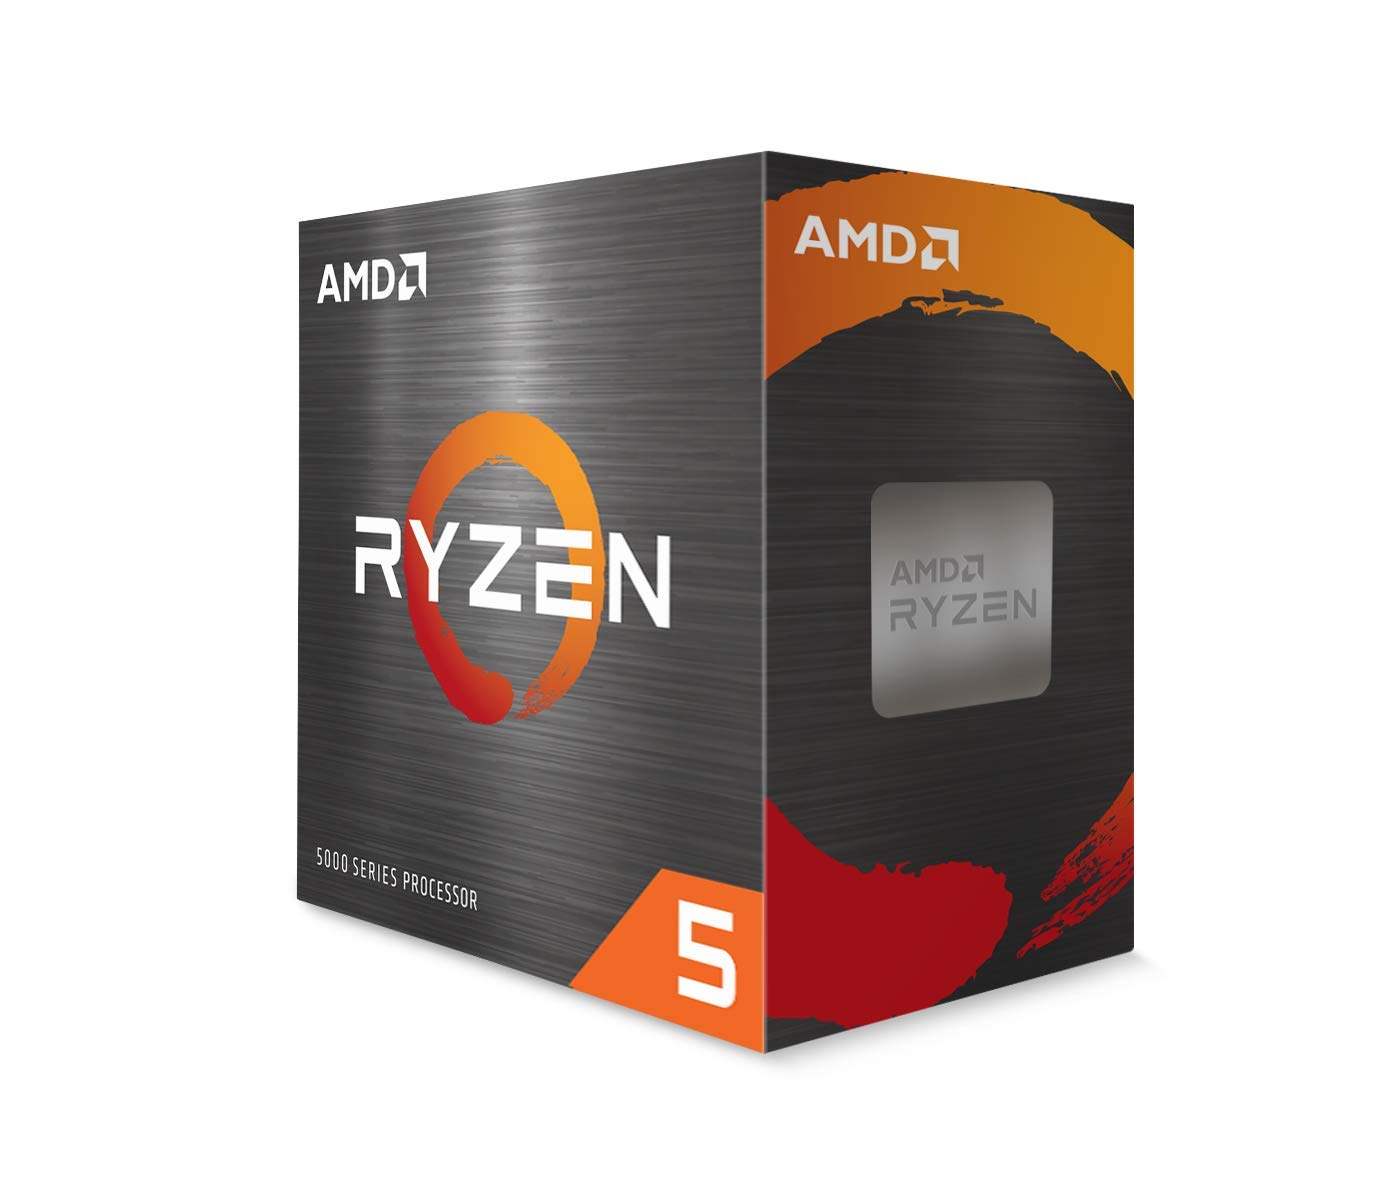 AMD Ryzen 5 5600X Vermeer 3.7GHz 6-Core AM4 Boxed Processor with Wraith Stealth Cooler - Micro Center in-store $289.99